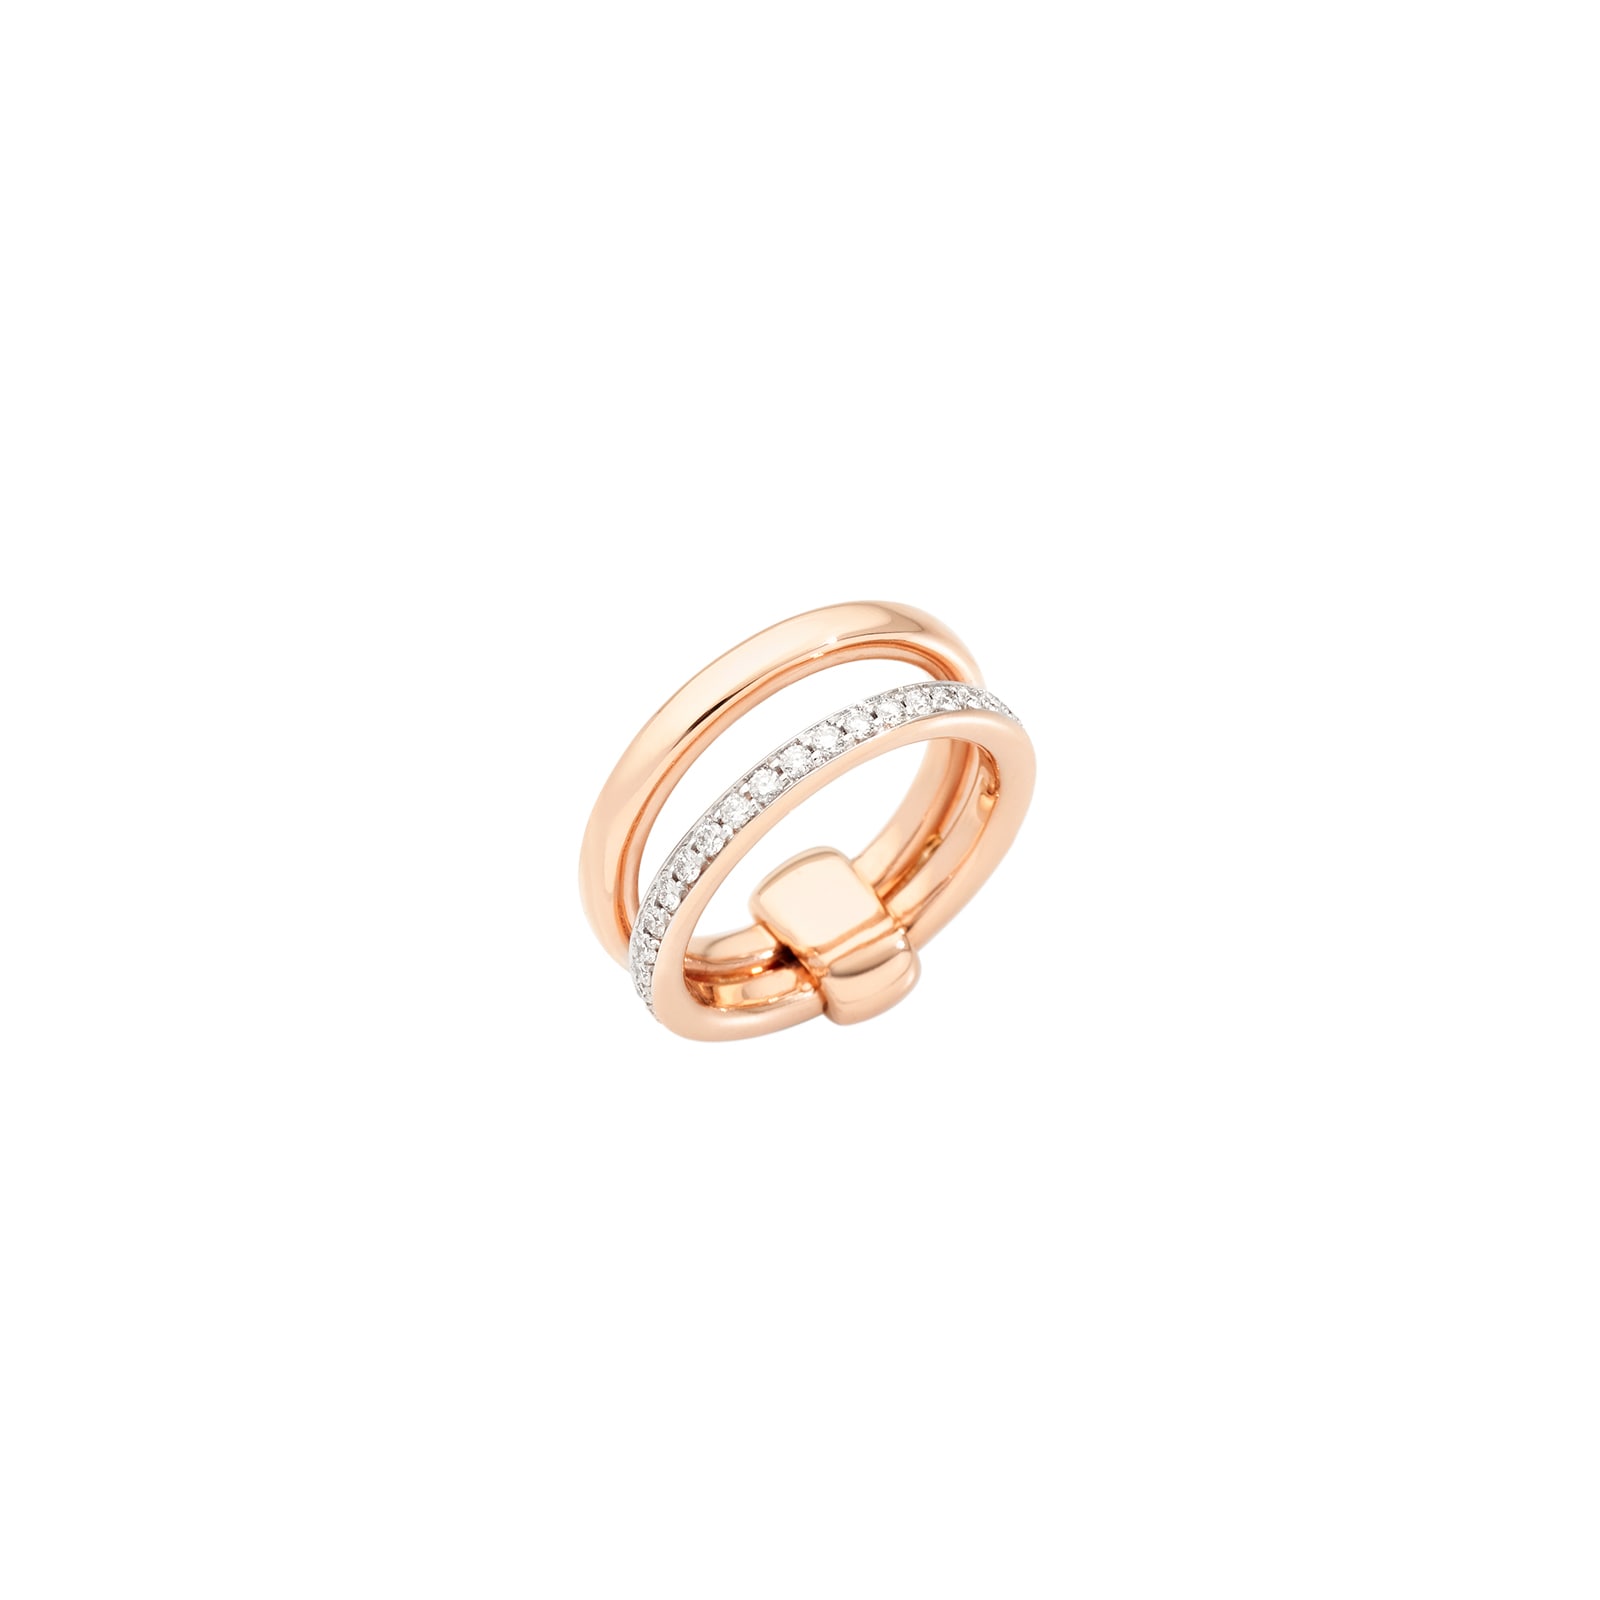 Together 18ct Rose Gold 0.40ct Diamond Ring - Ring Size N